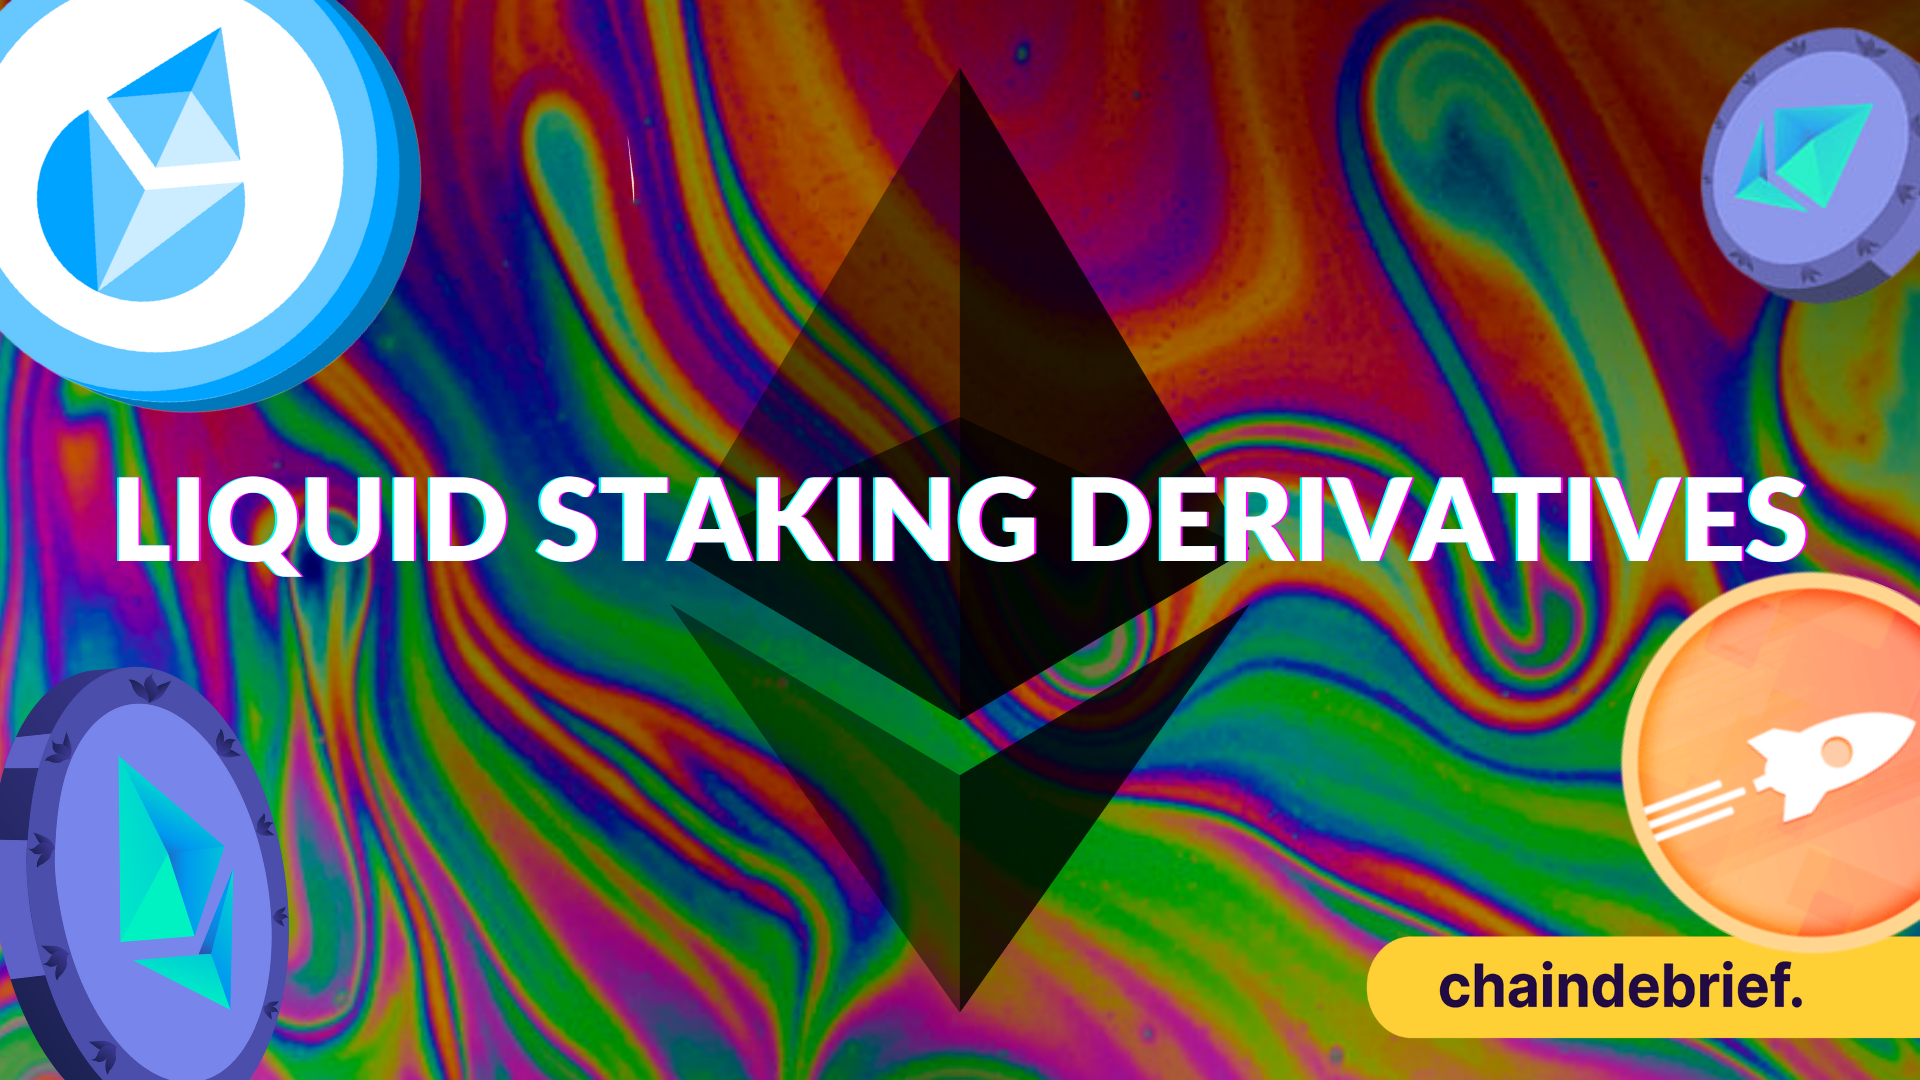 Are Liquid Staking Derivatives The Solution For Ethereum’s $19B Withdrawal?